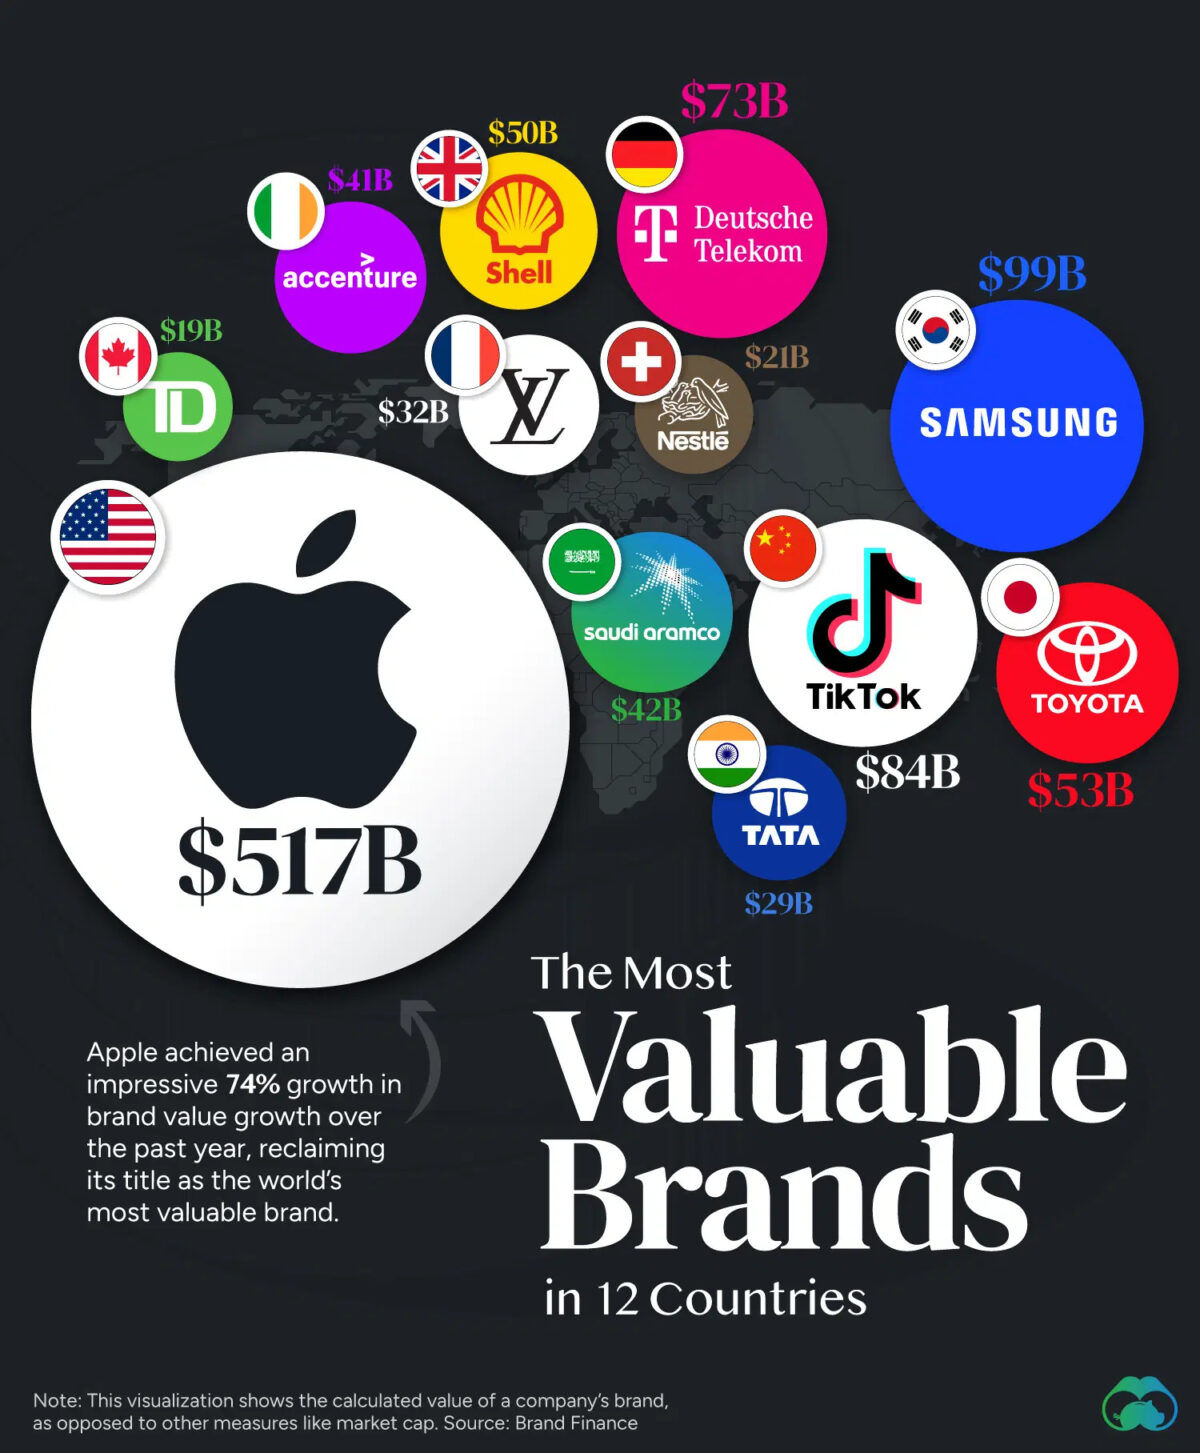 Visualizing the Most Valuable Brands by Country